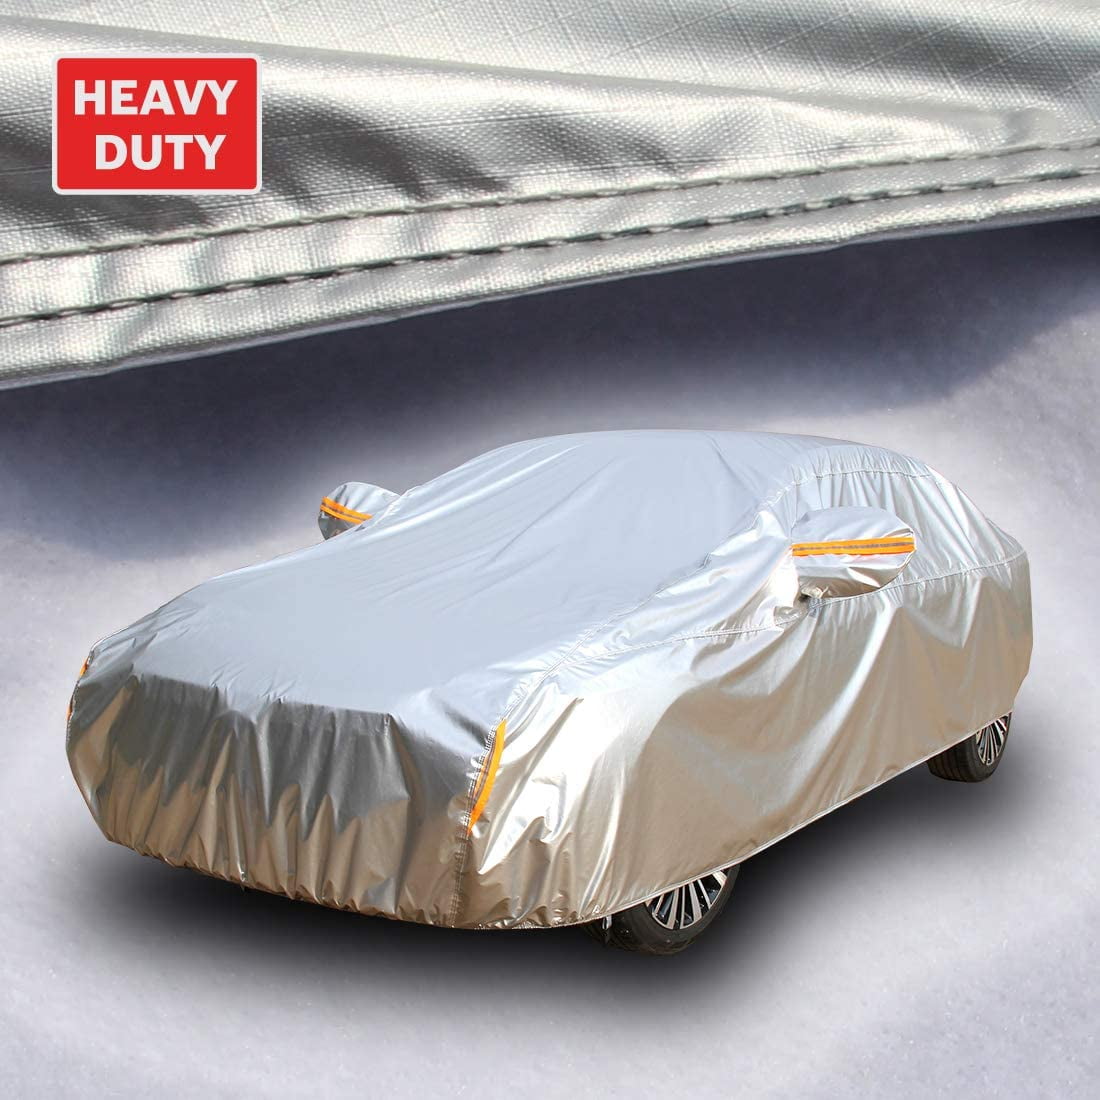 PREMIUM WATERPROOF CAR COVER HEAVYDUTY COTTON LINED BMW 318 CONVERTIBLE 